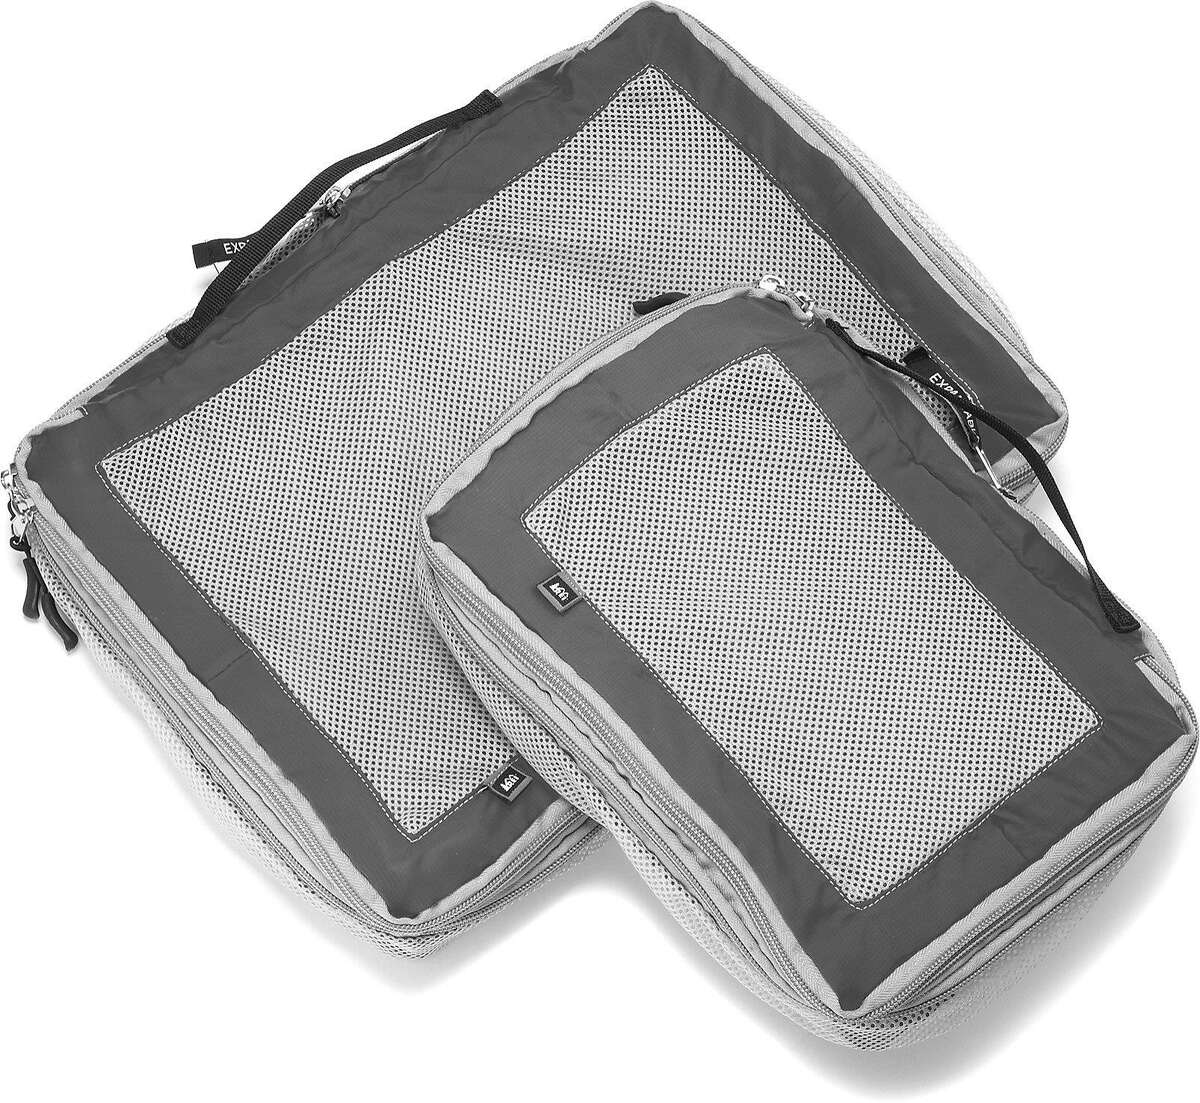 REI Co-op Expandable Packing Cube Set.